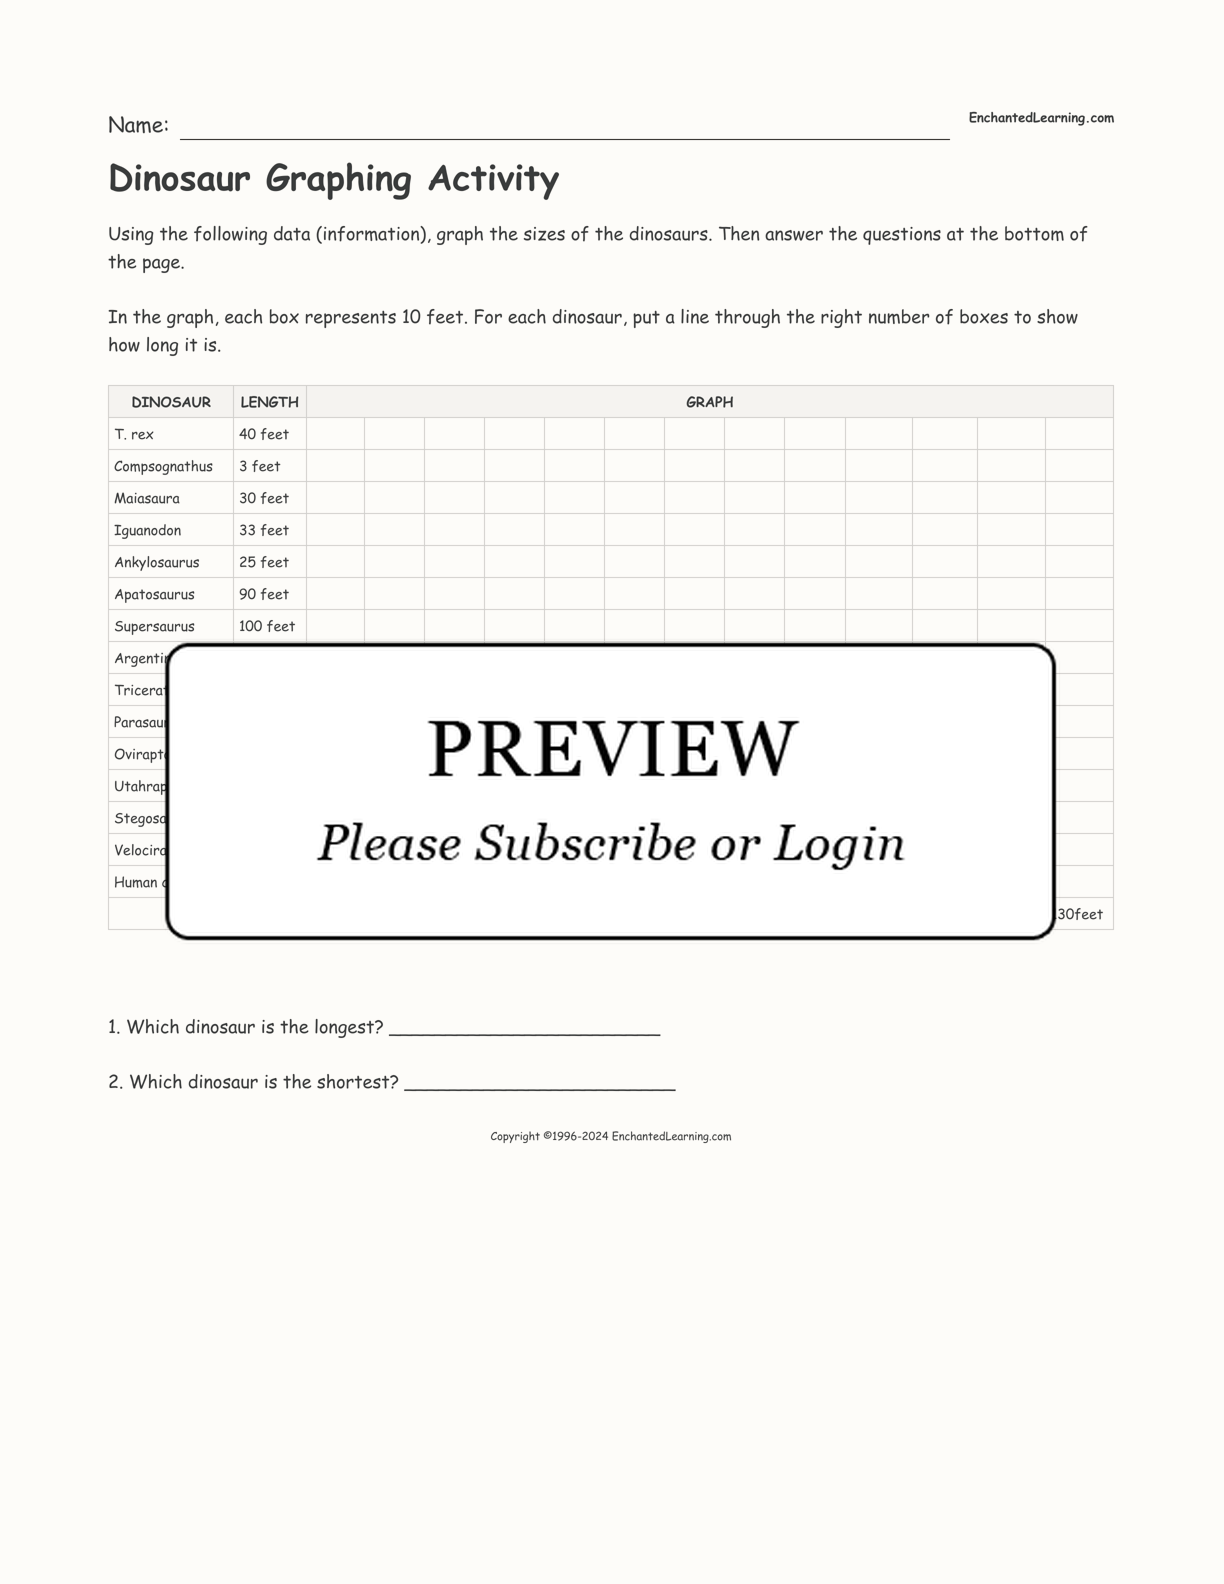 Dinosaur Graphing Activity interactive worksheet page 1